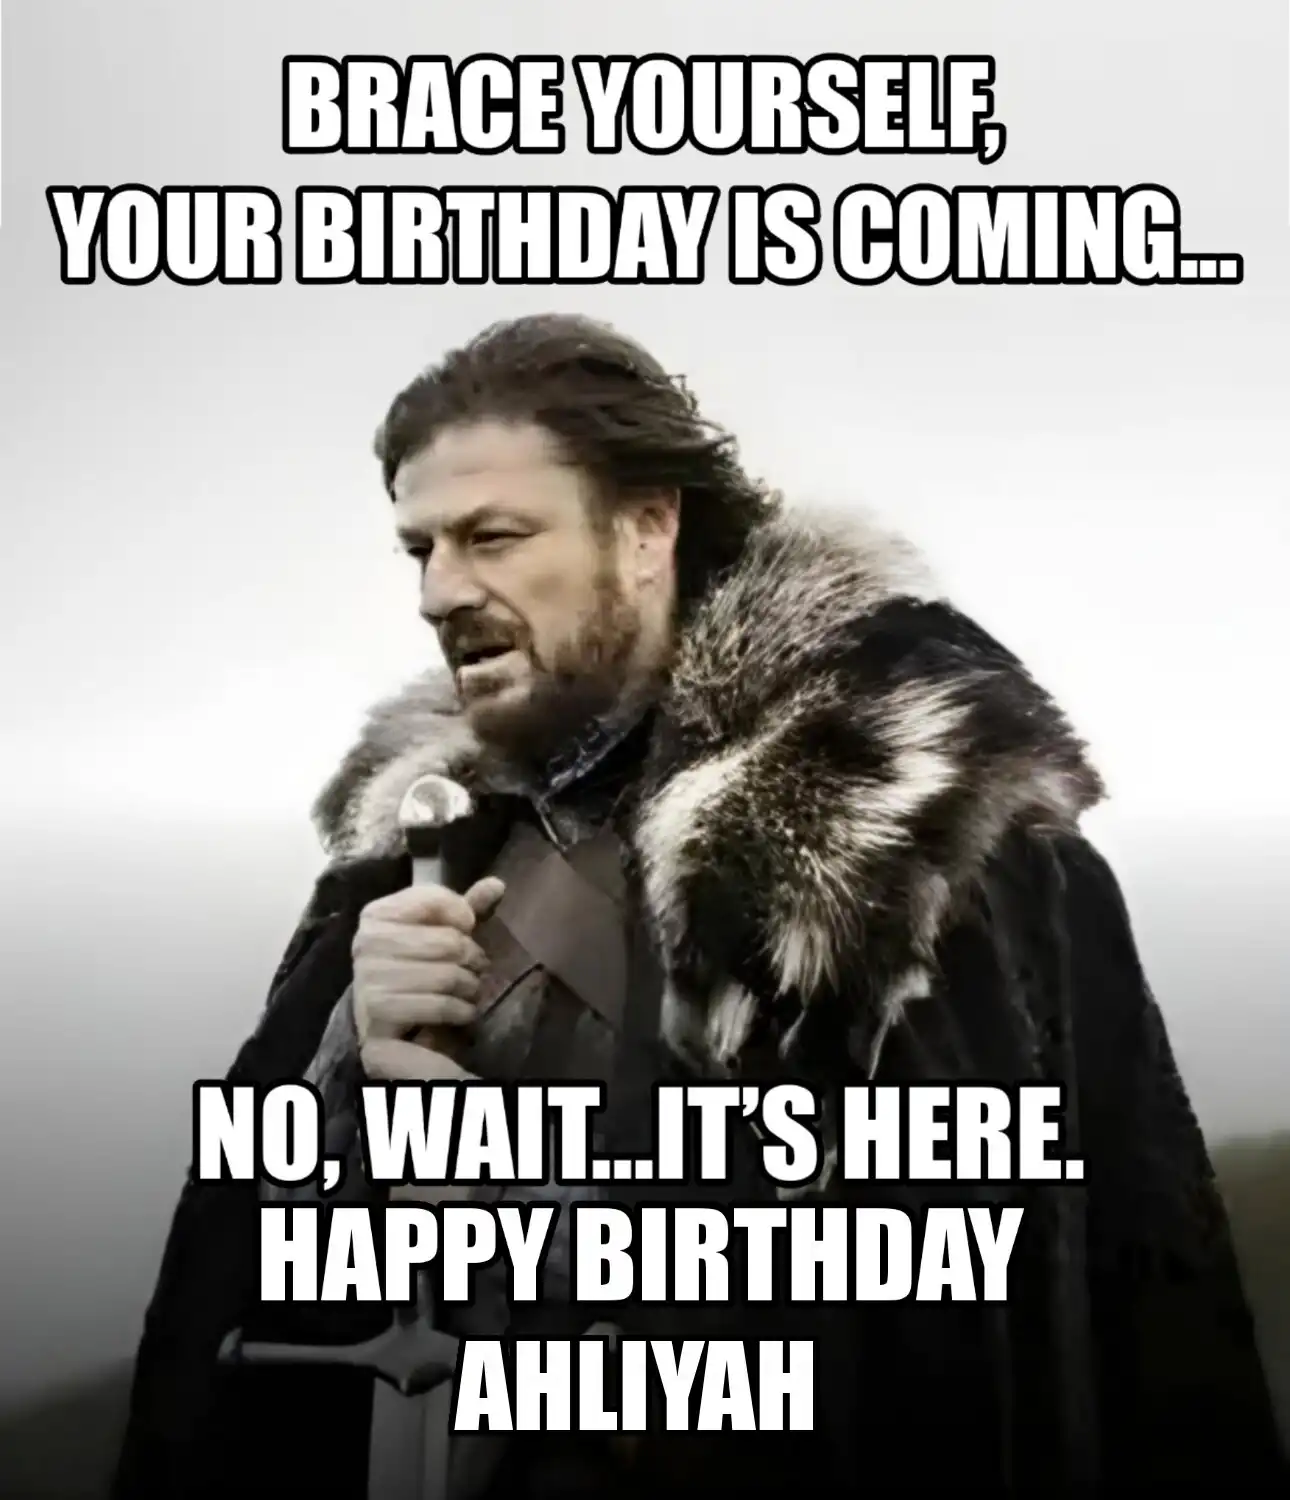 Happy Birthday Ahliyah Brace Yourself Your Birthday Is Coming Meme